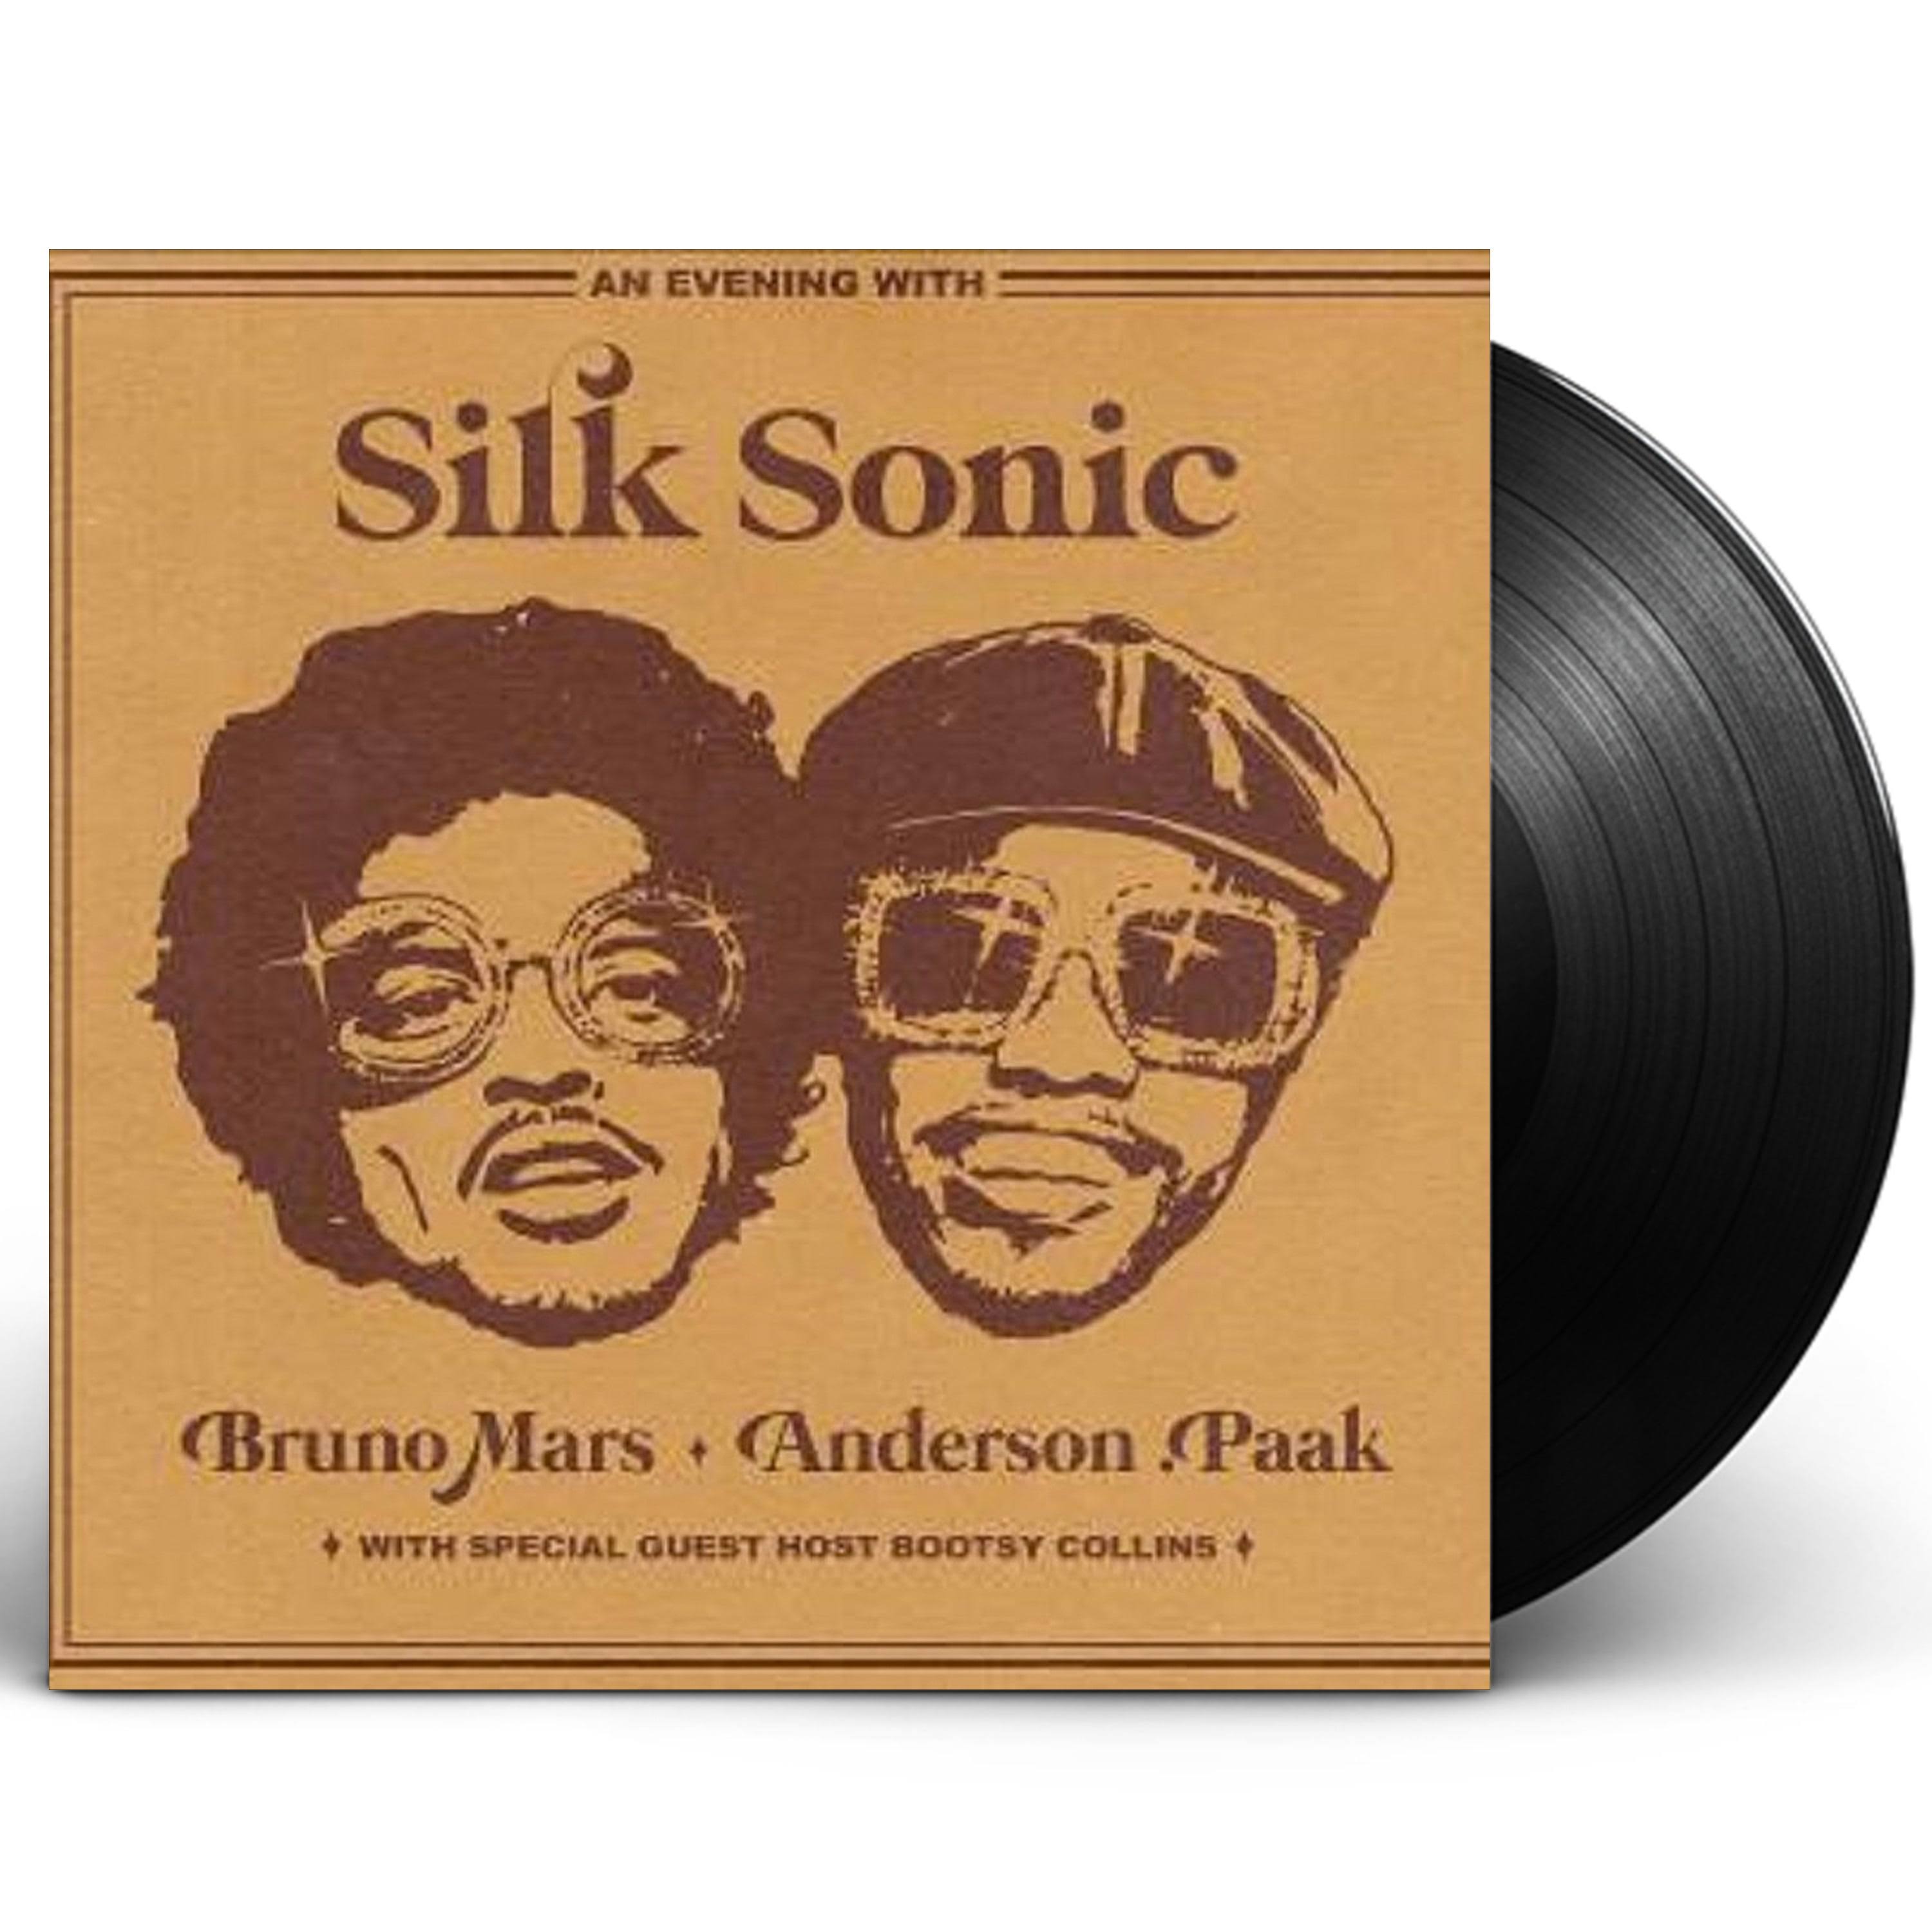 Silk Sonic Mars, Bruno & Paak, Anderson - An Evening with Silk Sonic